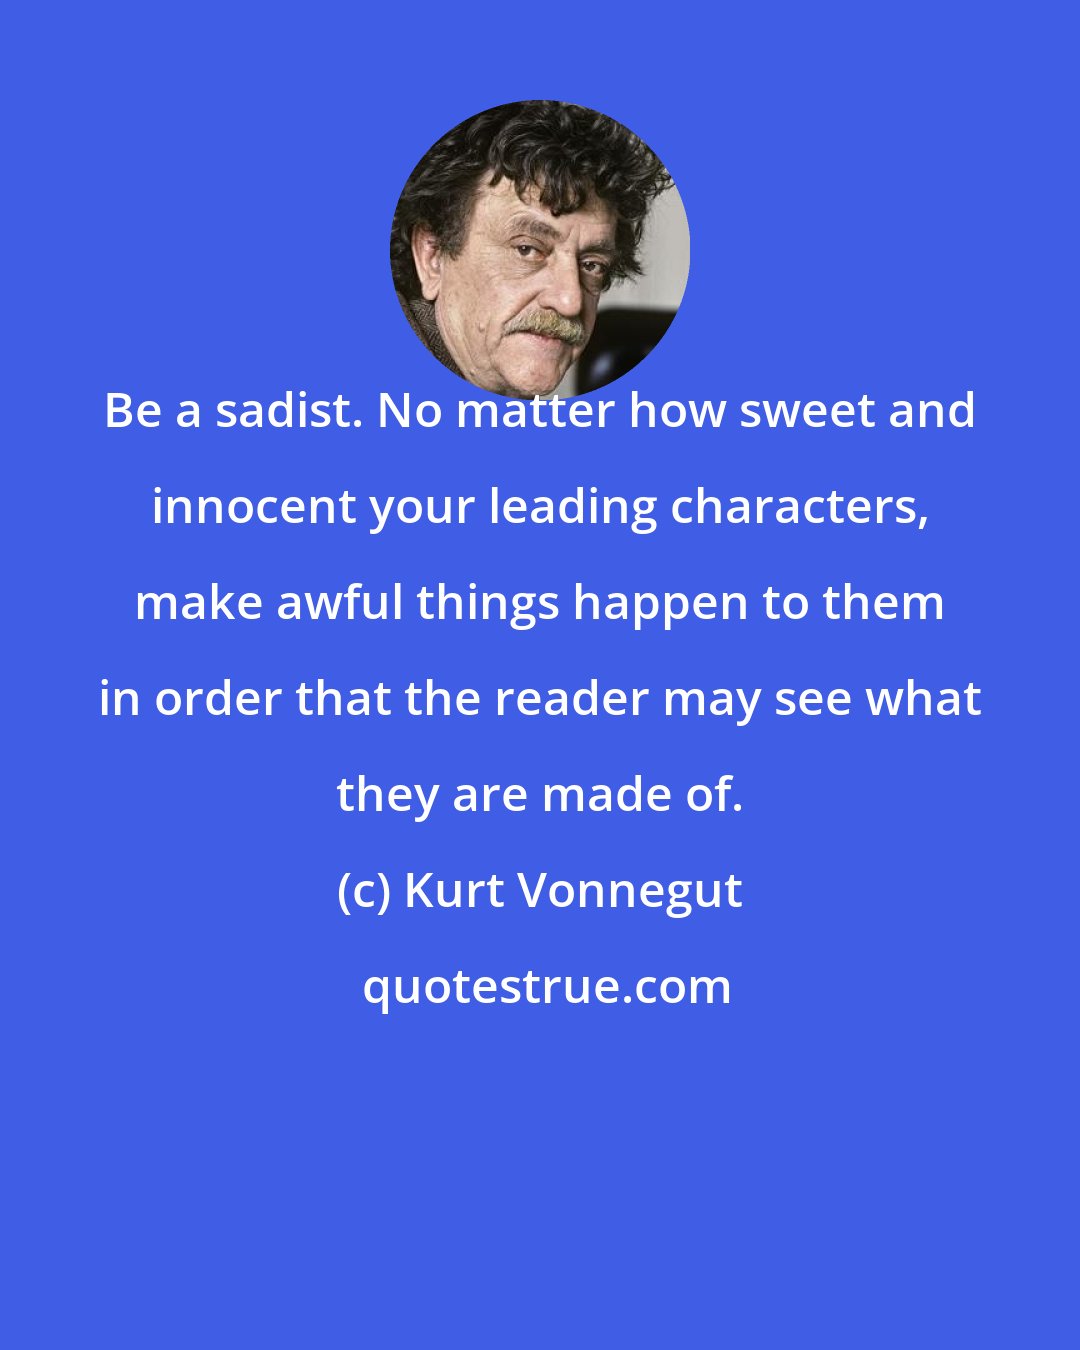 Kurt Vonnegut: Be a sadist. No matter how sweet and innocent your leading characters, make awful things happen to them in order that the reader may see what they are made of.